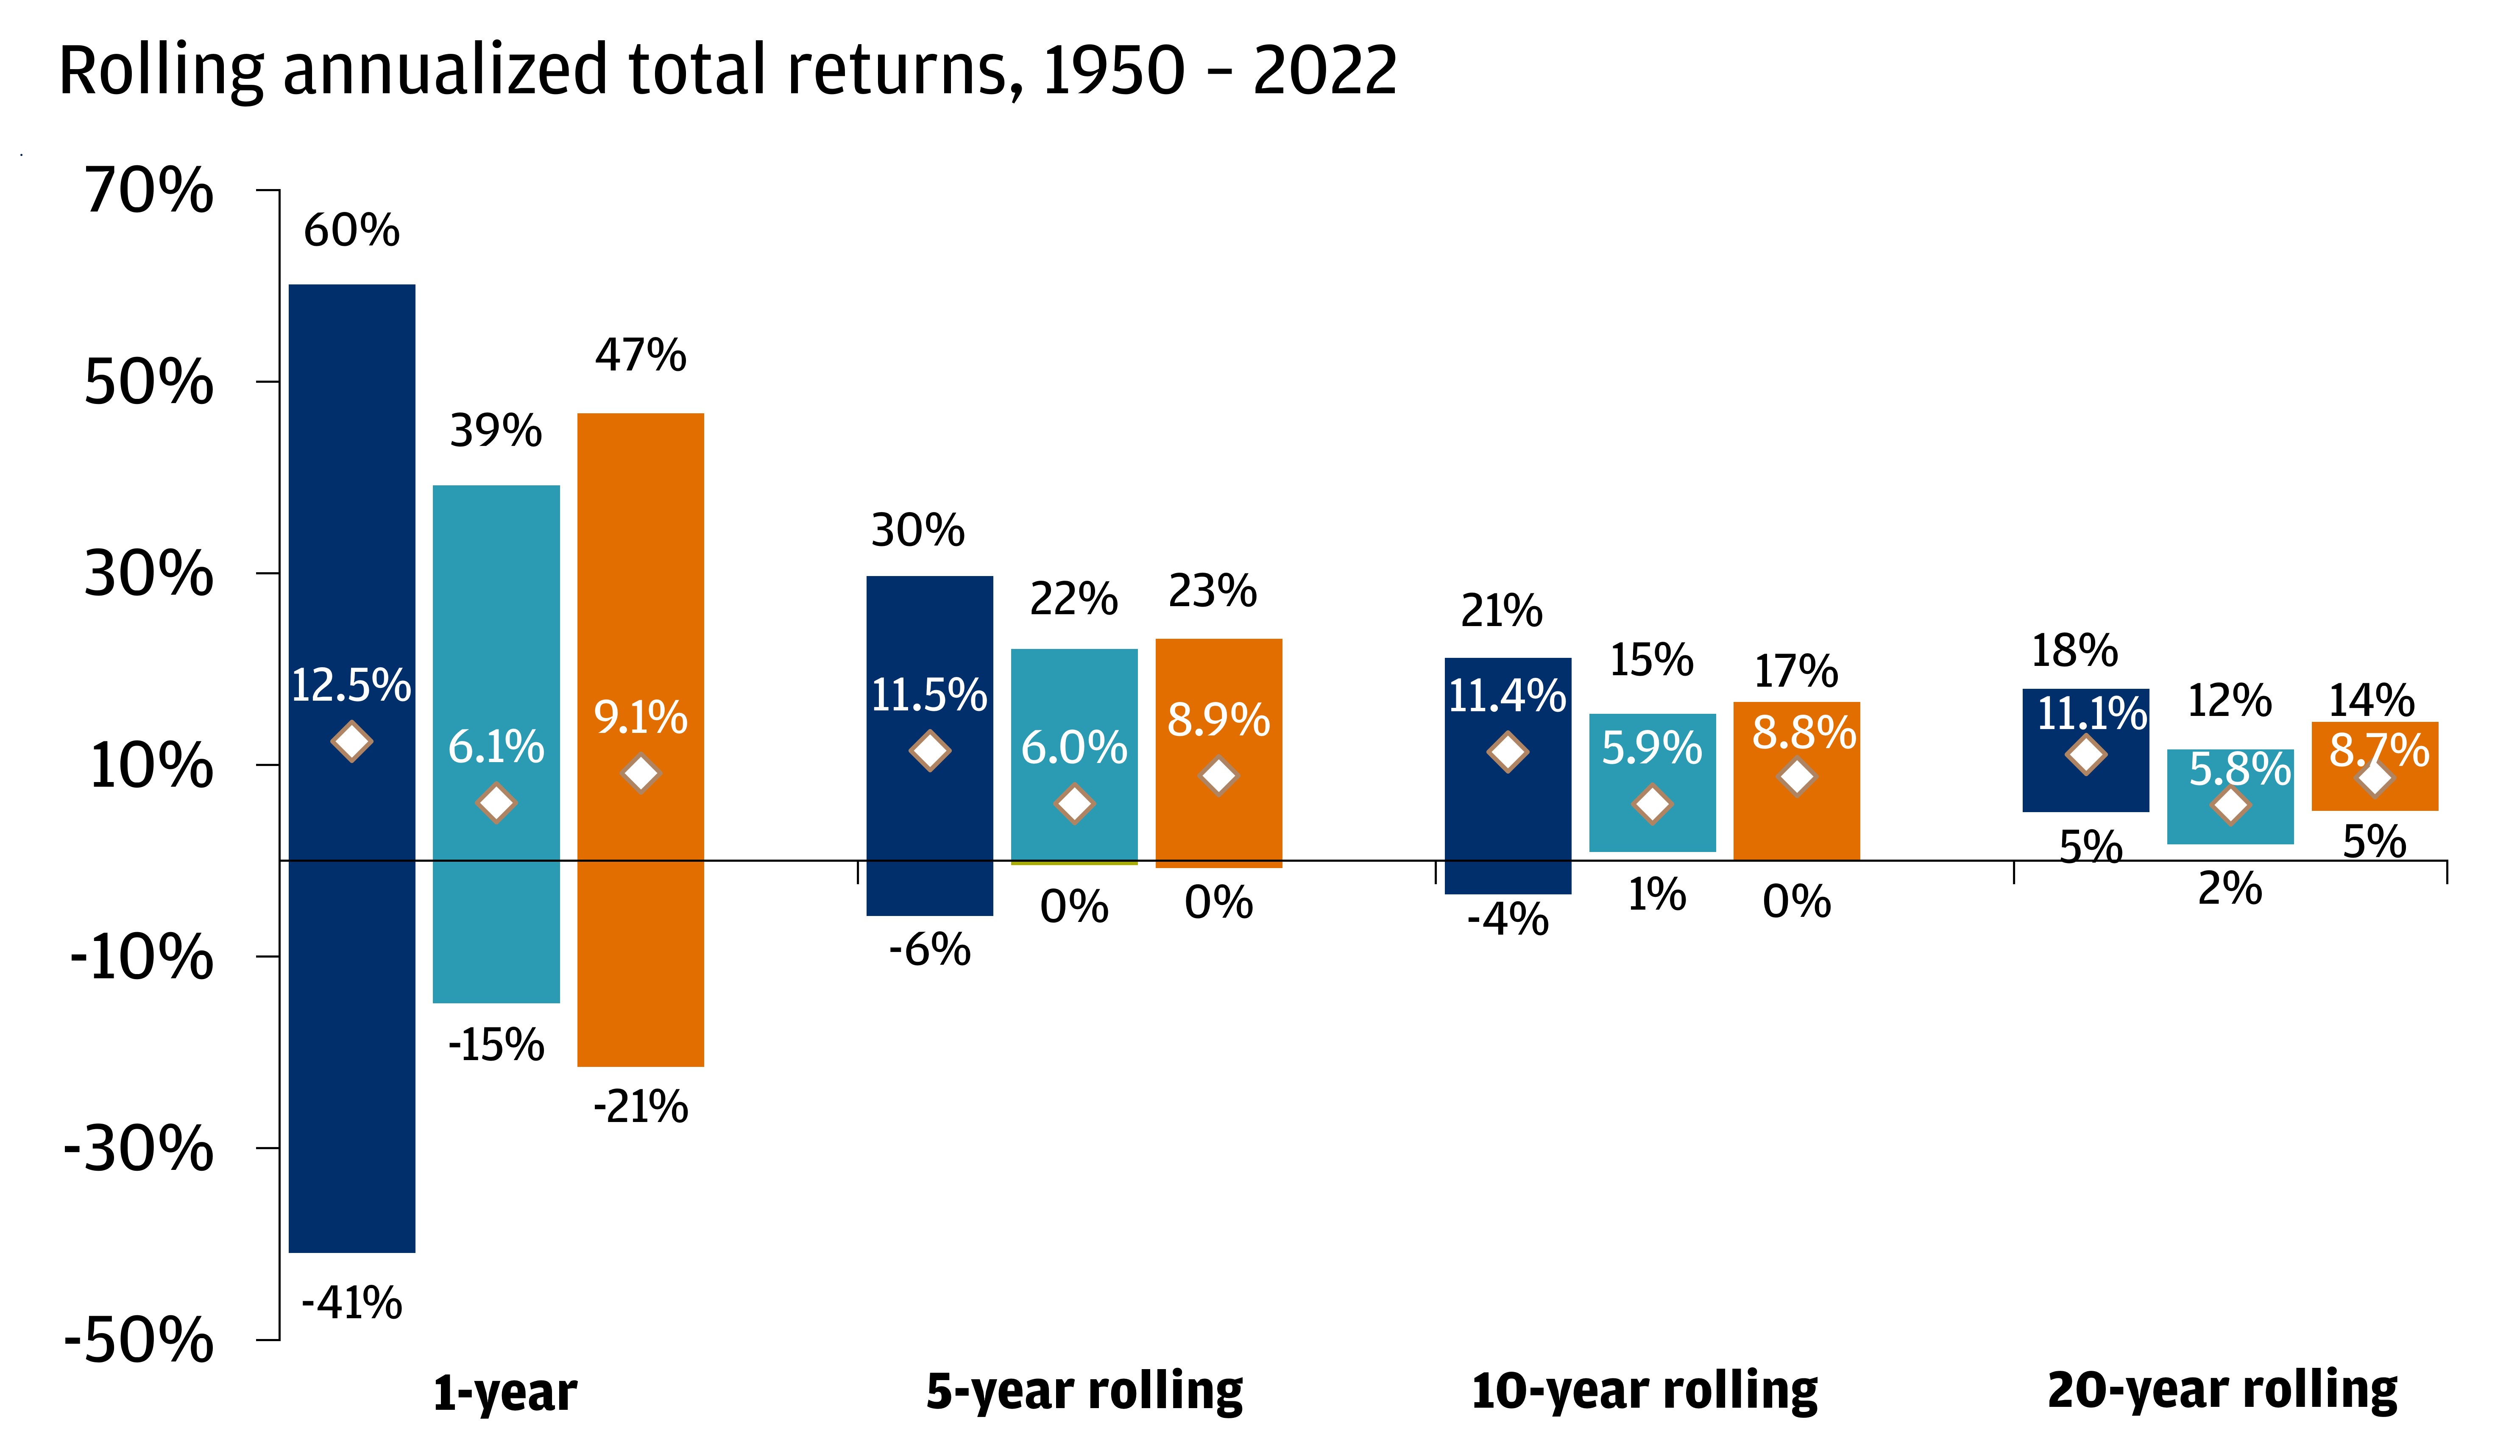 In each scenario, it shows the maximum and minimum annualized returns in that specific timeframe.